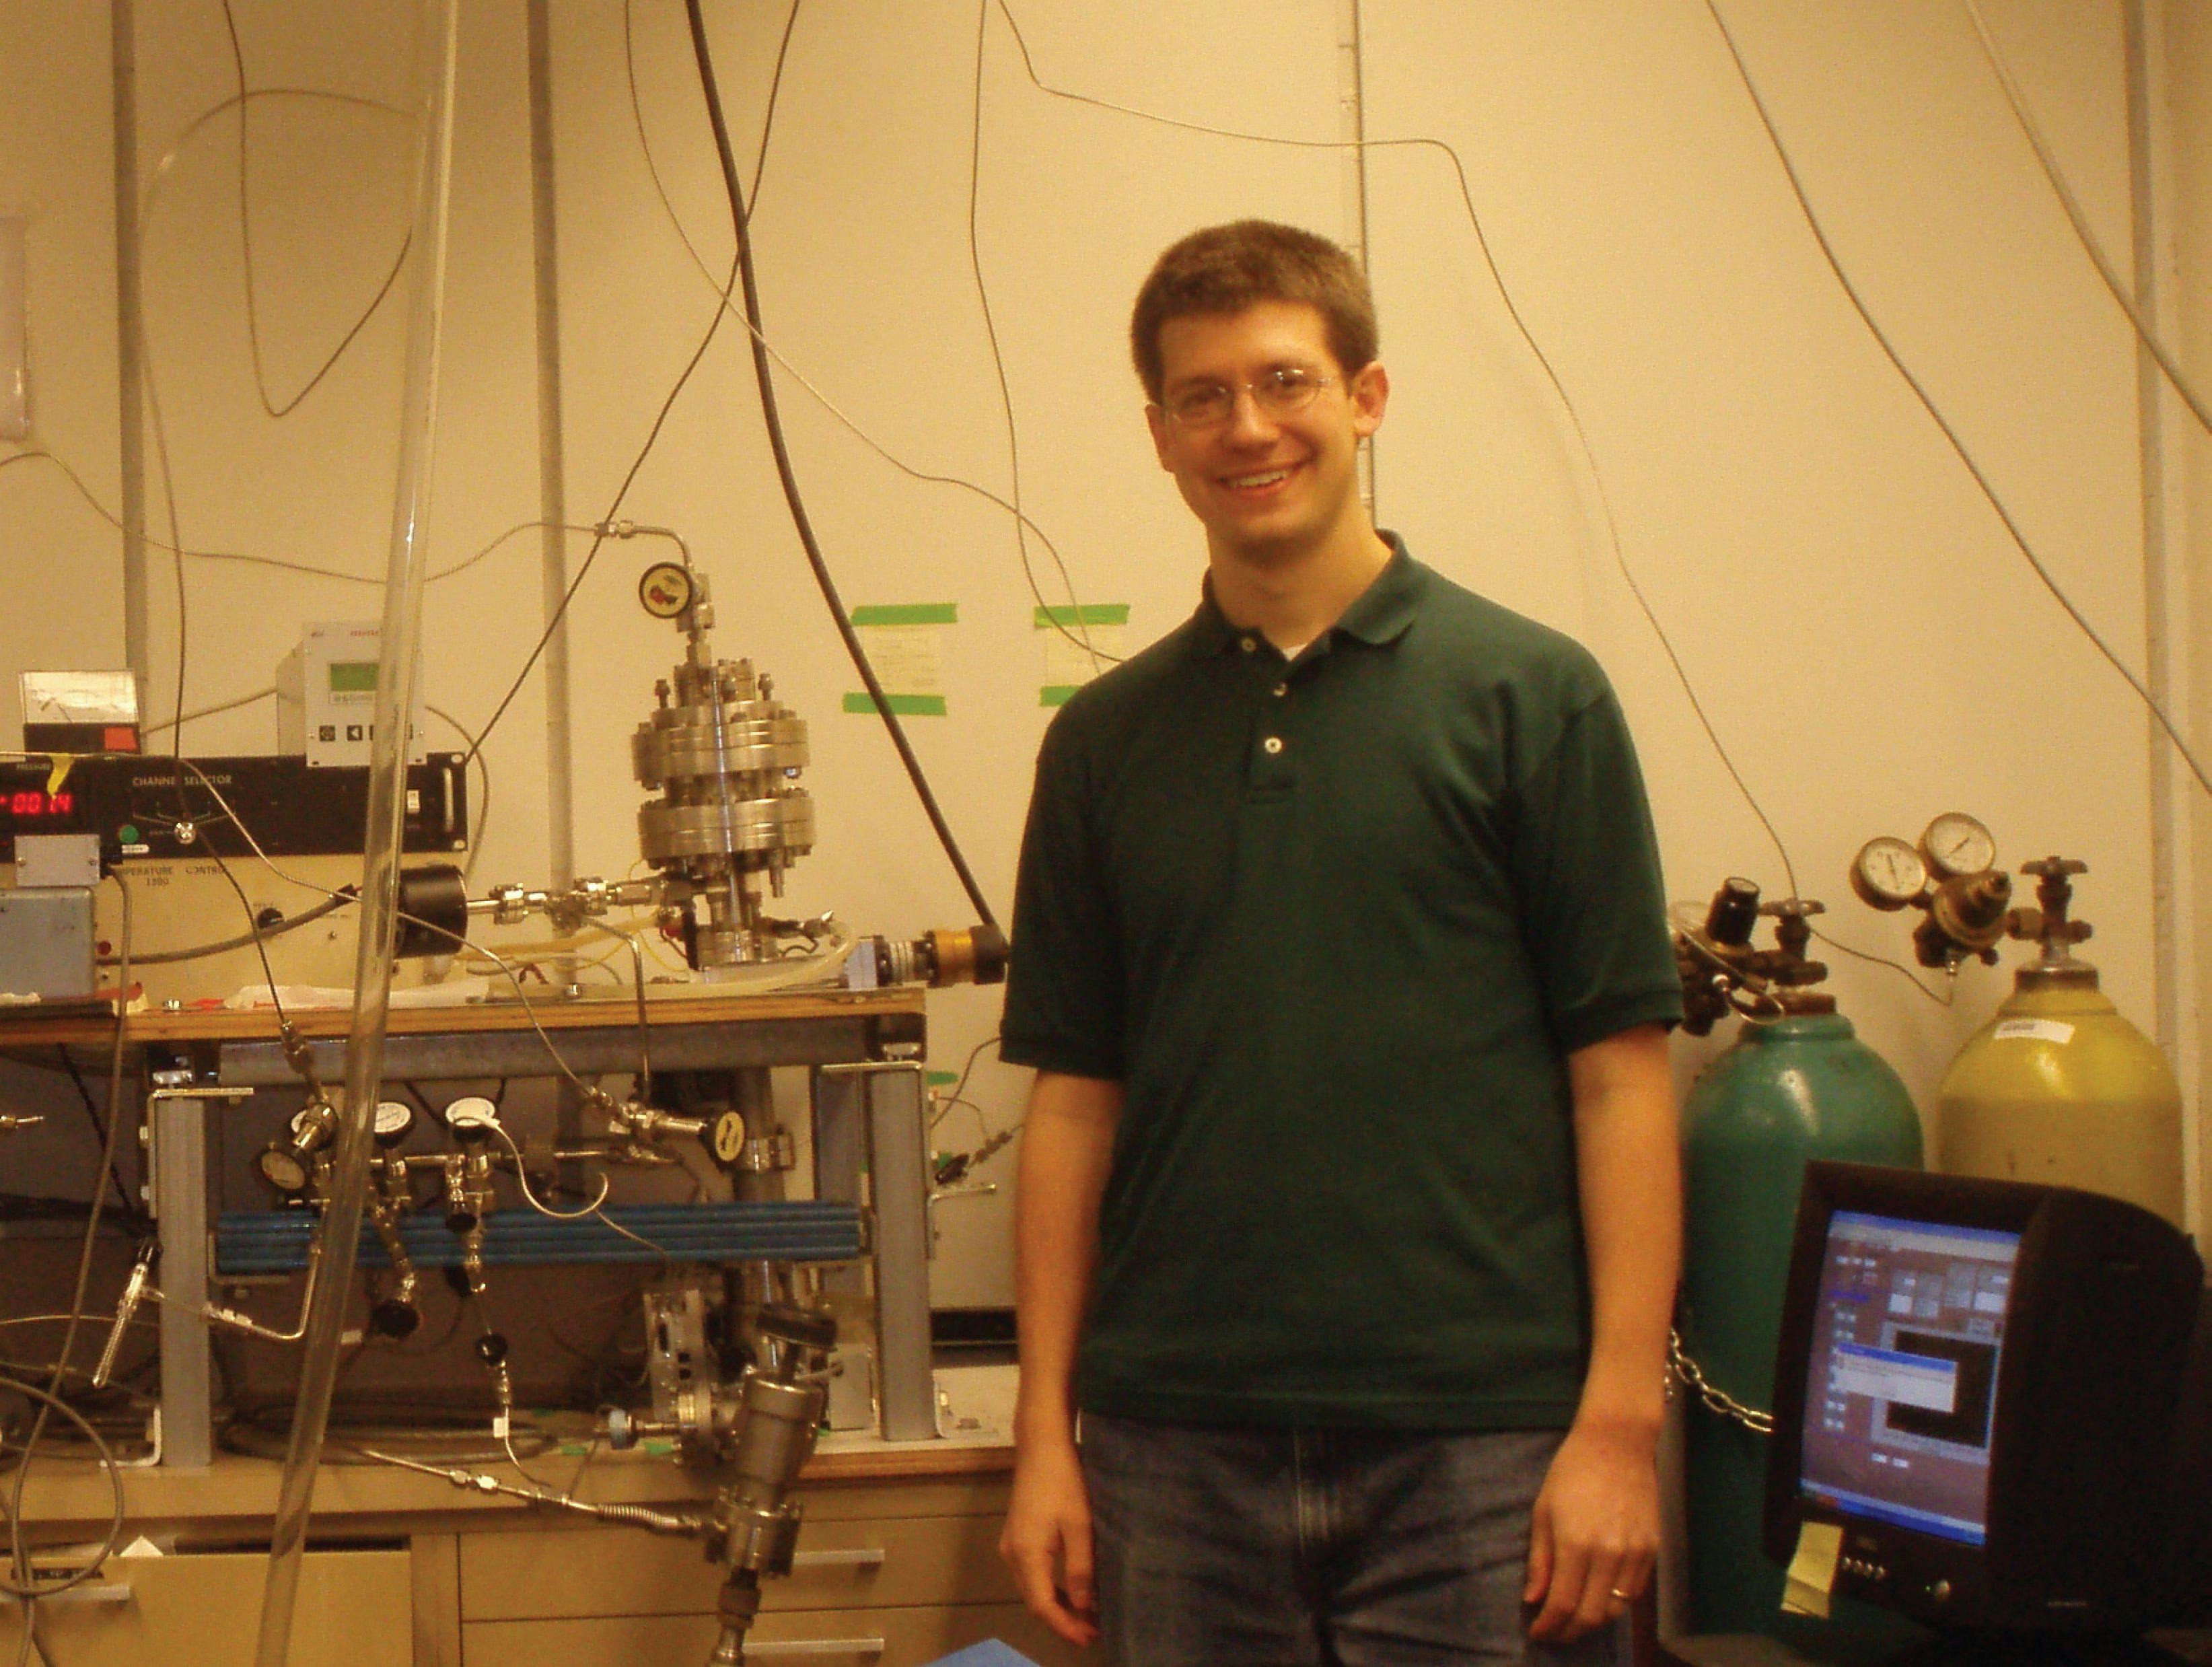 FIGURE 5: Baker as a graduate student in Gabor Somorjai’s laboratory at University of California, Berkeley in 2011. Shown in the background is the hot electron nanodiode reactor.